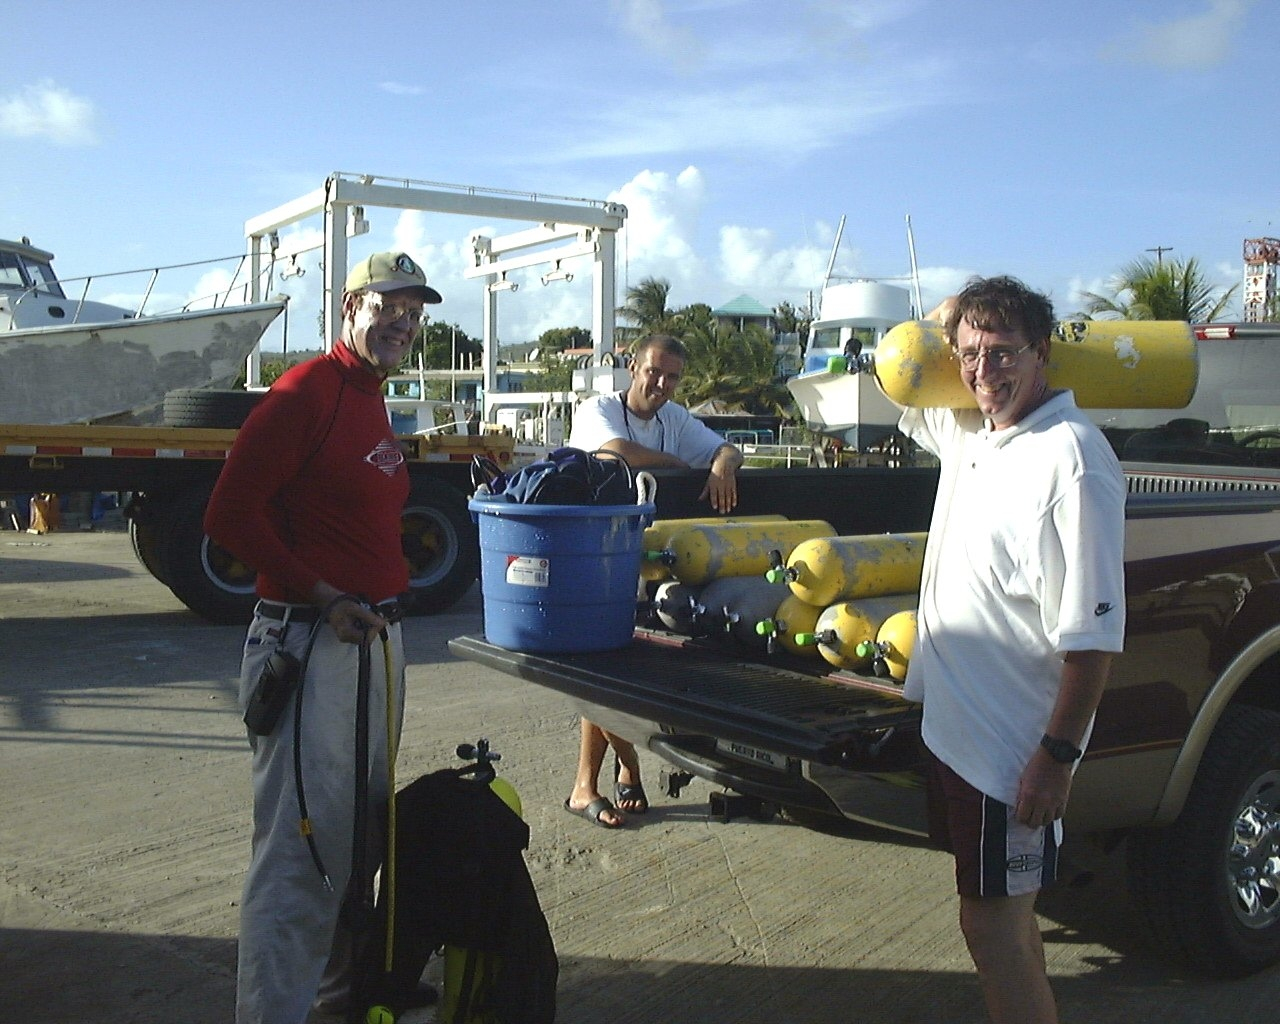 SCUBA tanks being loaded in preparation for work with fish on offshore cage sitein Culebra Island, Puerto Rico